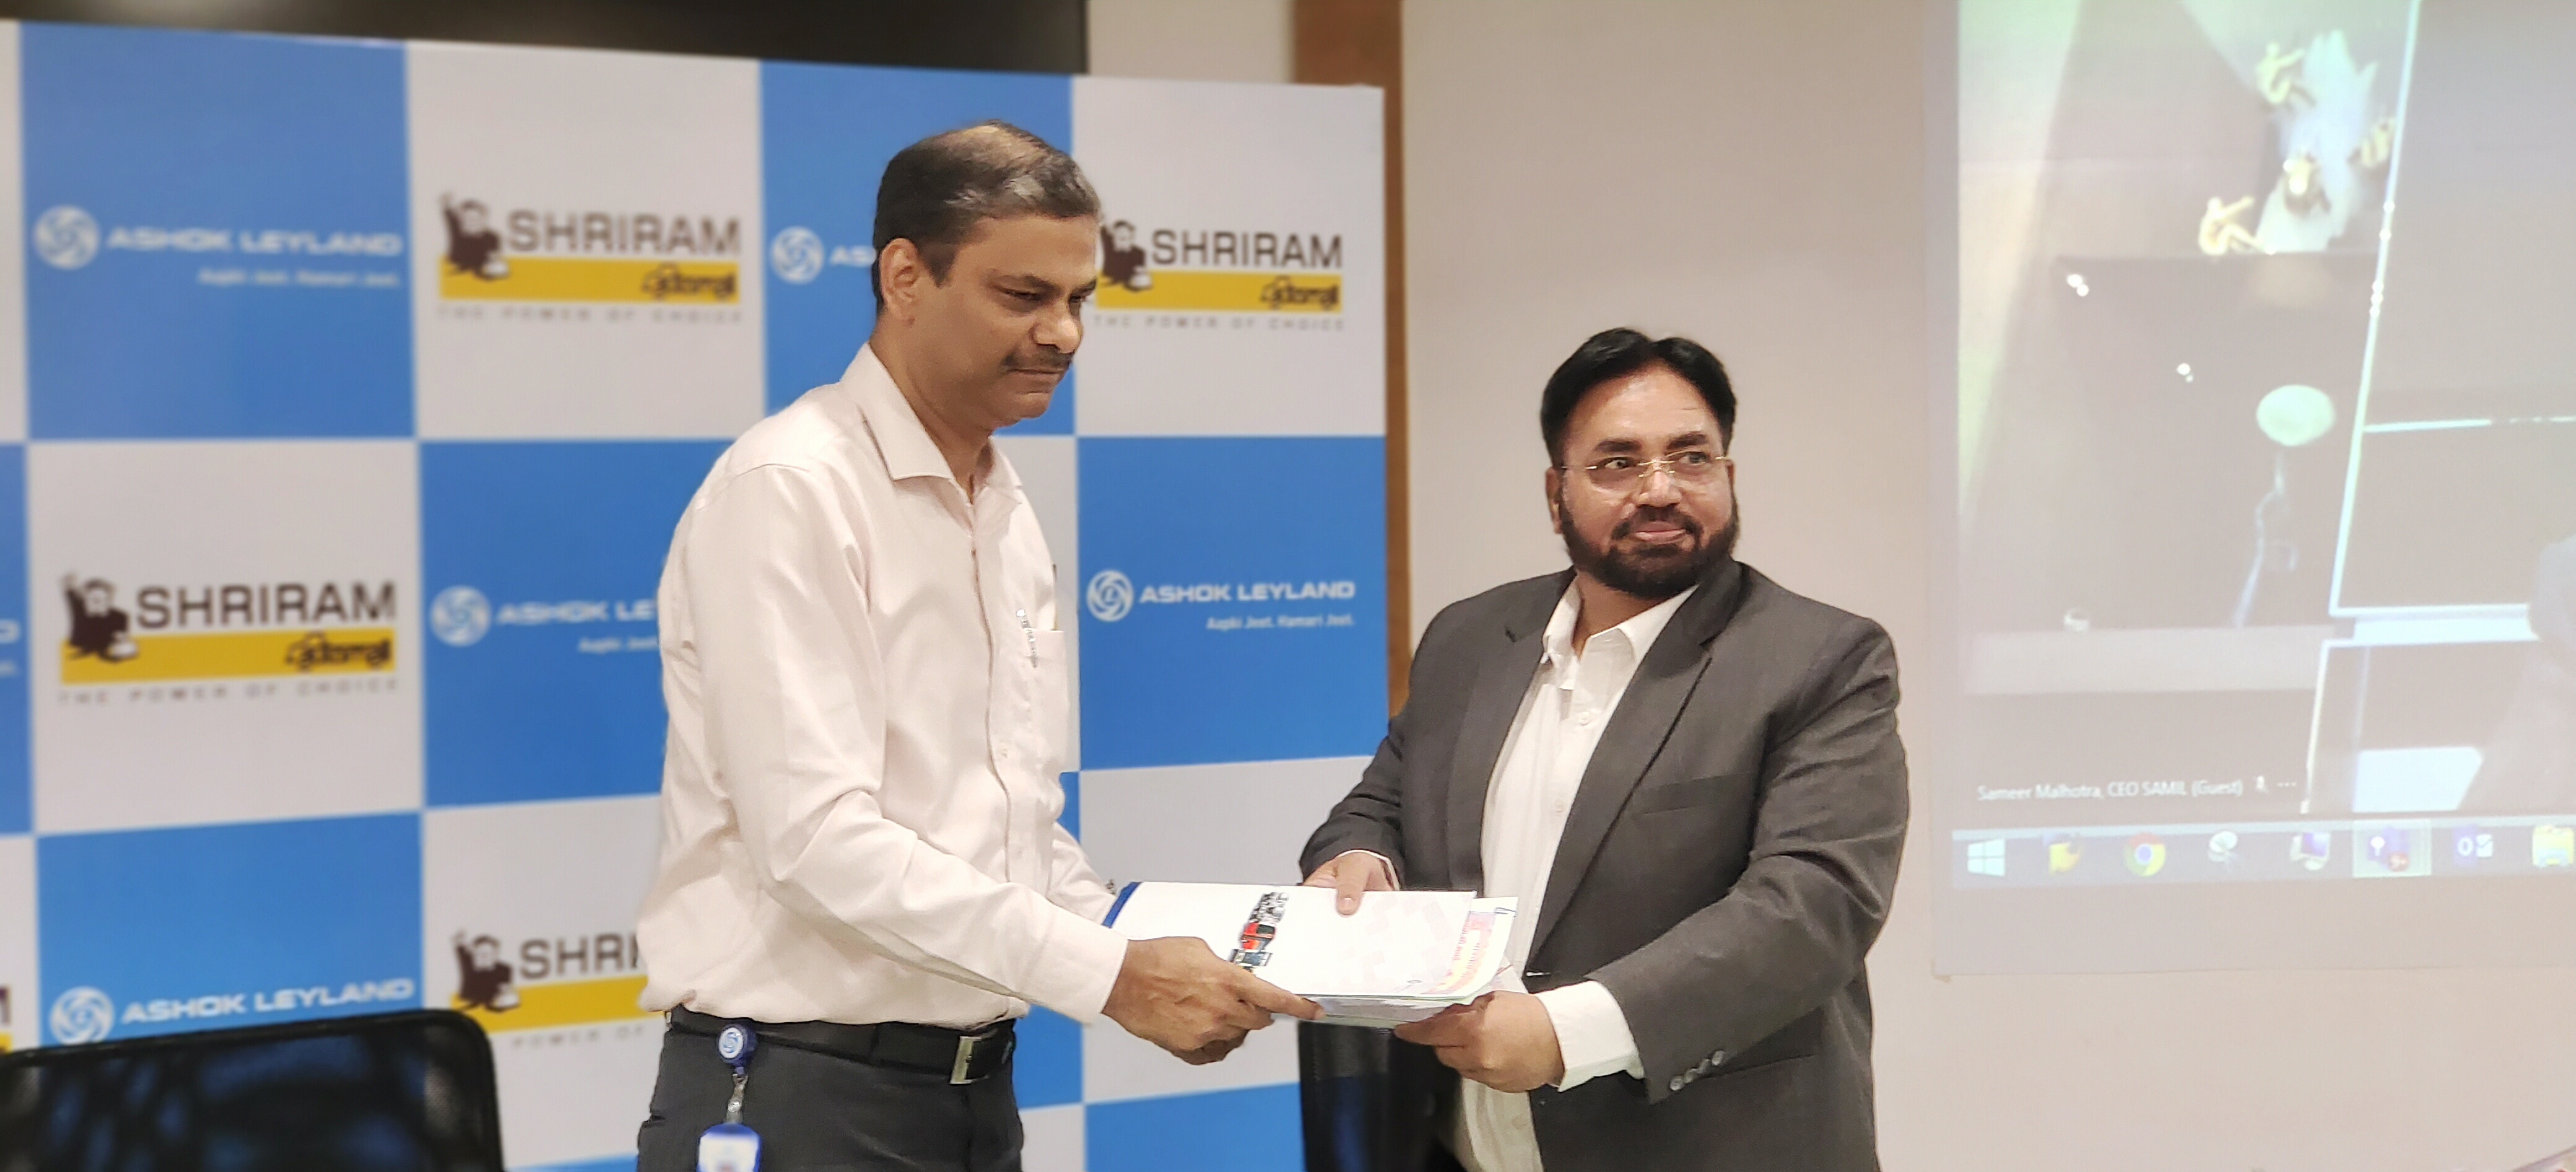 ashok-leyland-ties-up-with-shriram-auto-mall-to-enter-theused-commercial-vehicles-business